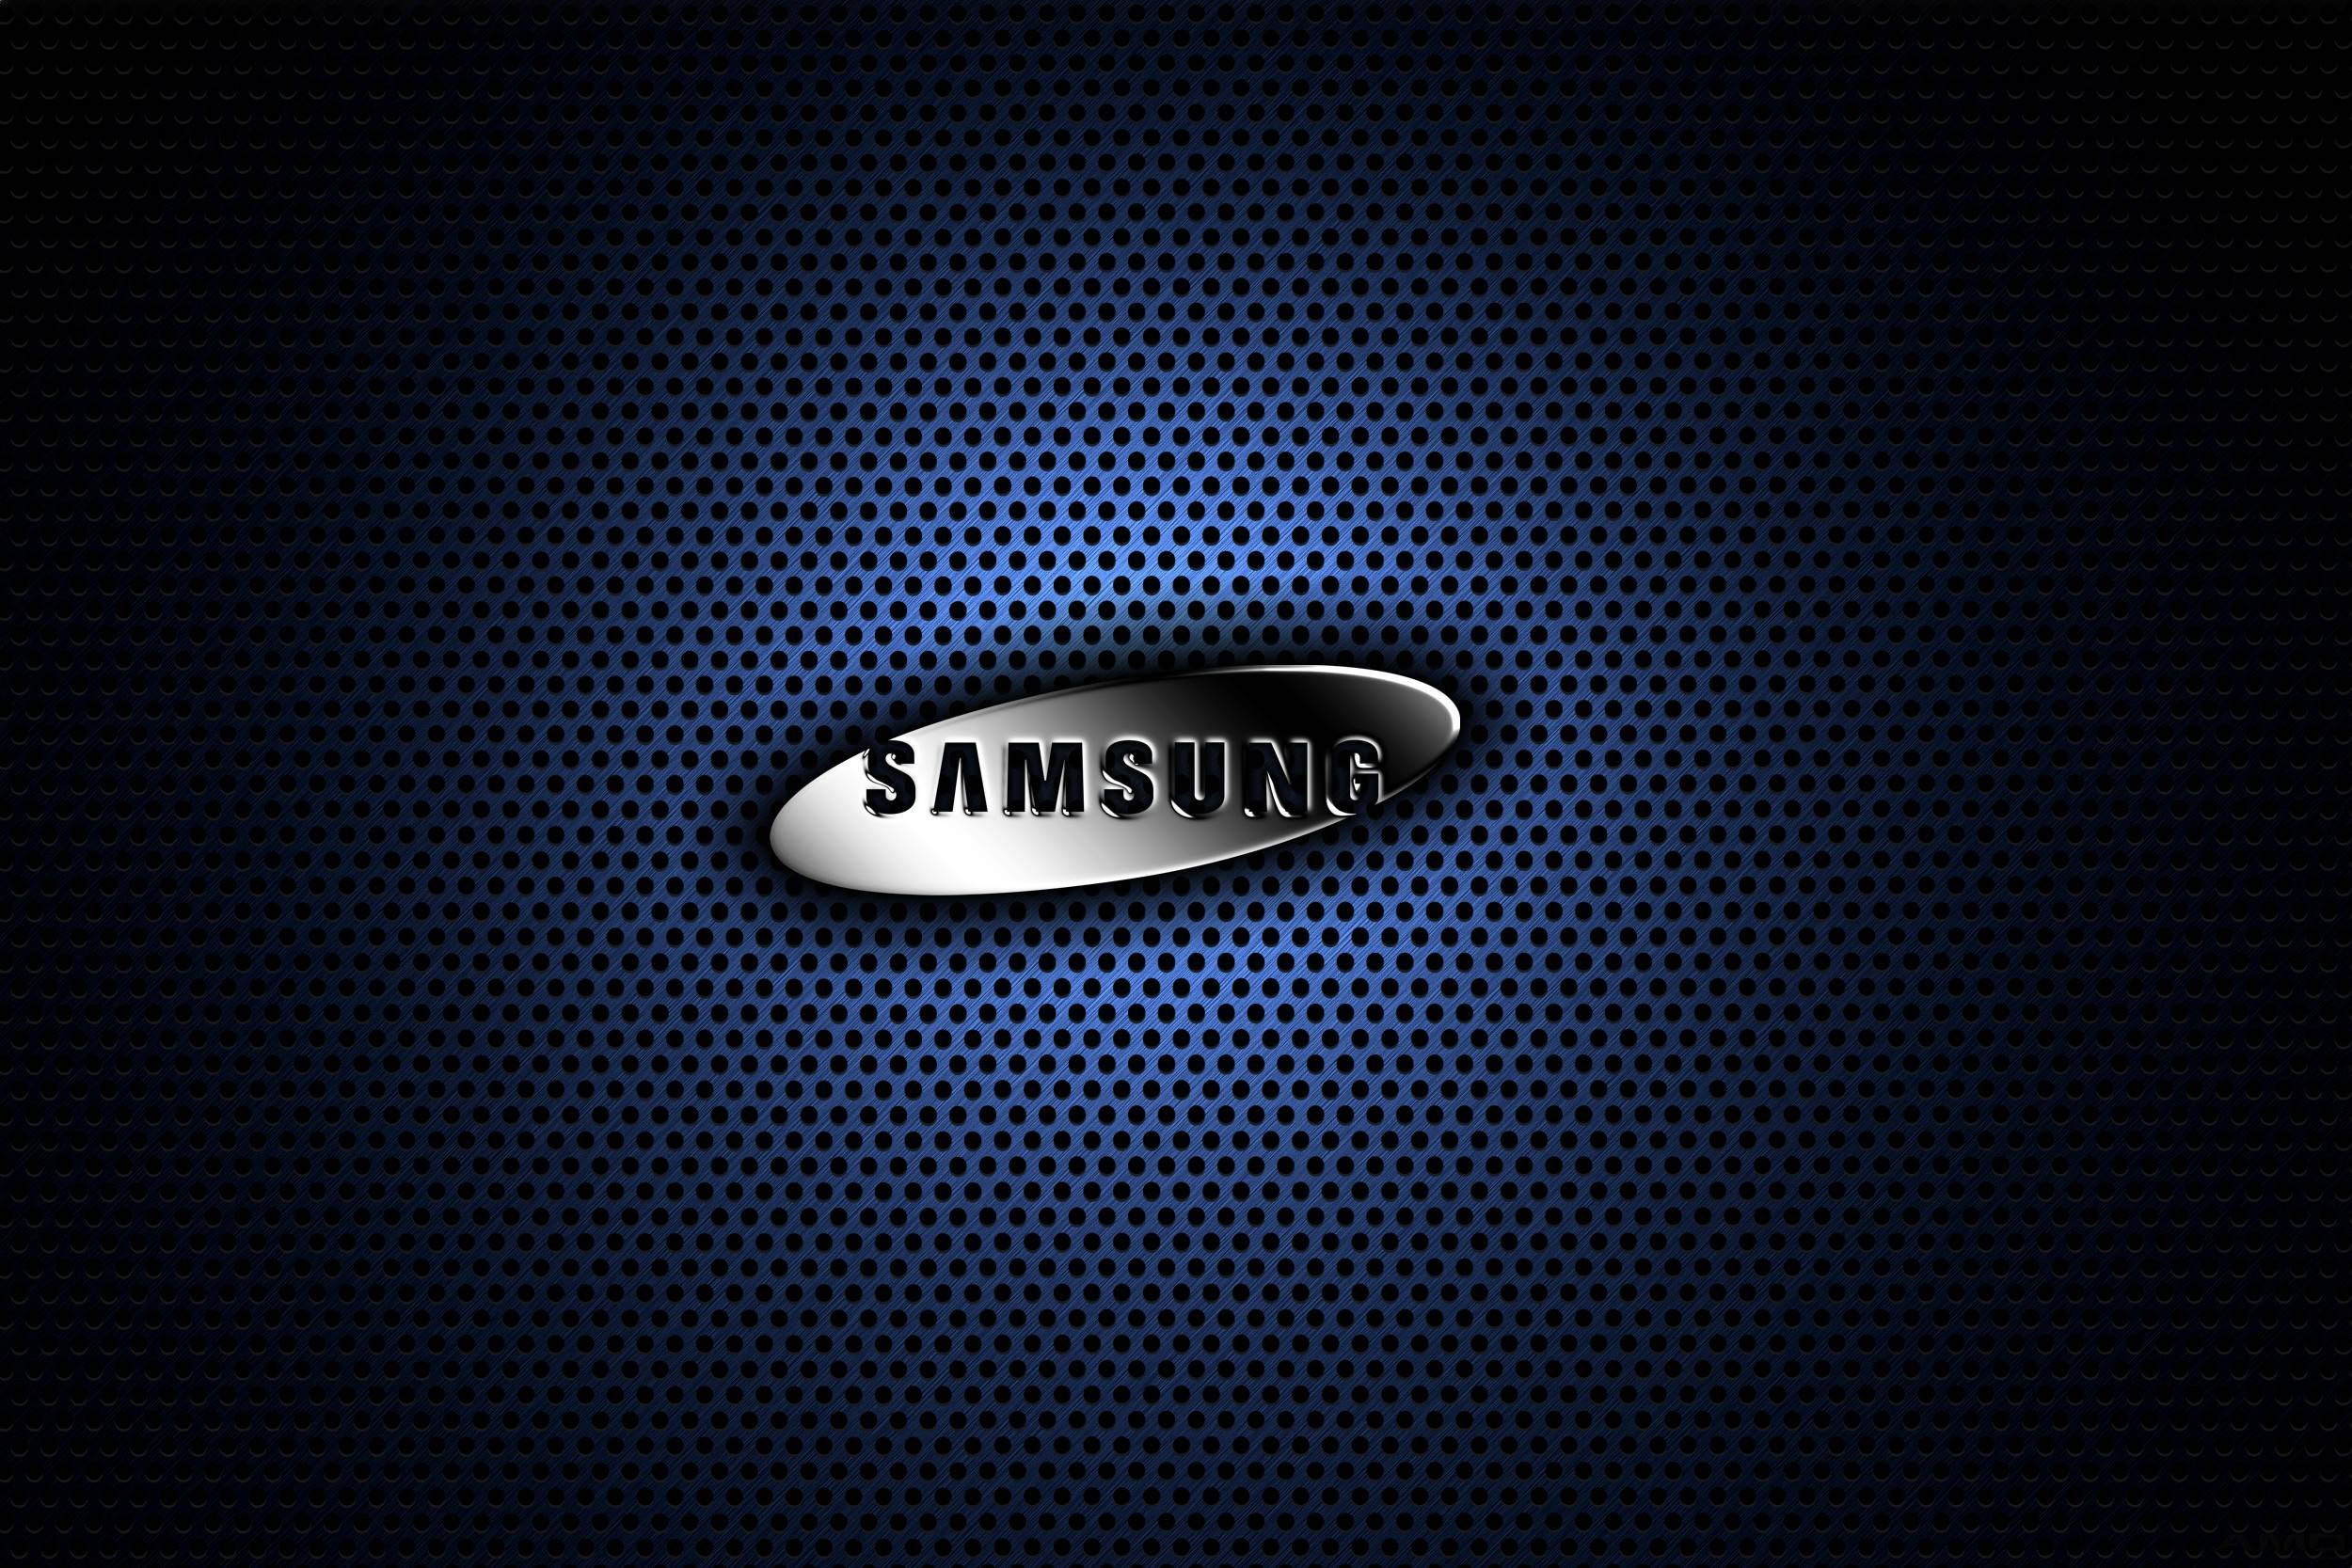 Samsung logo wallpapers Wide or HD